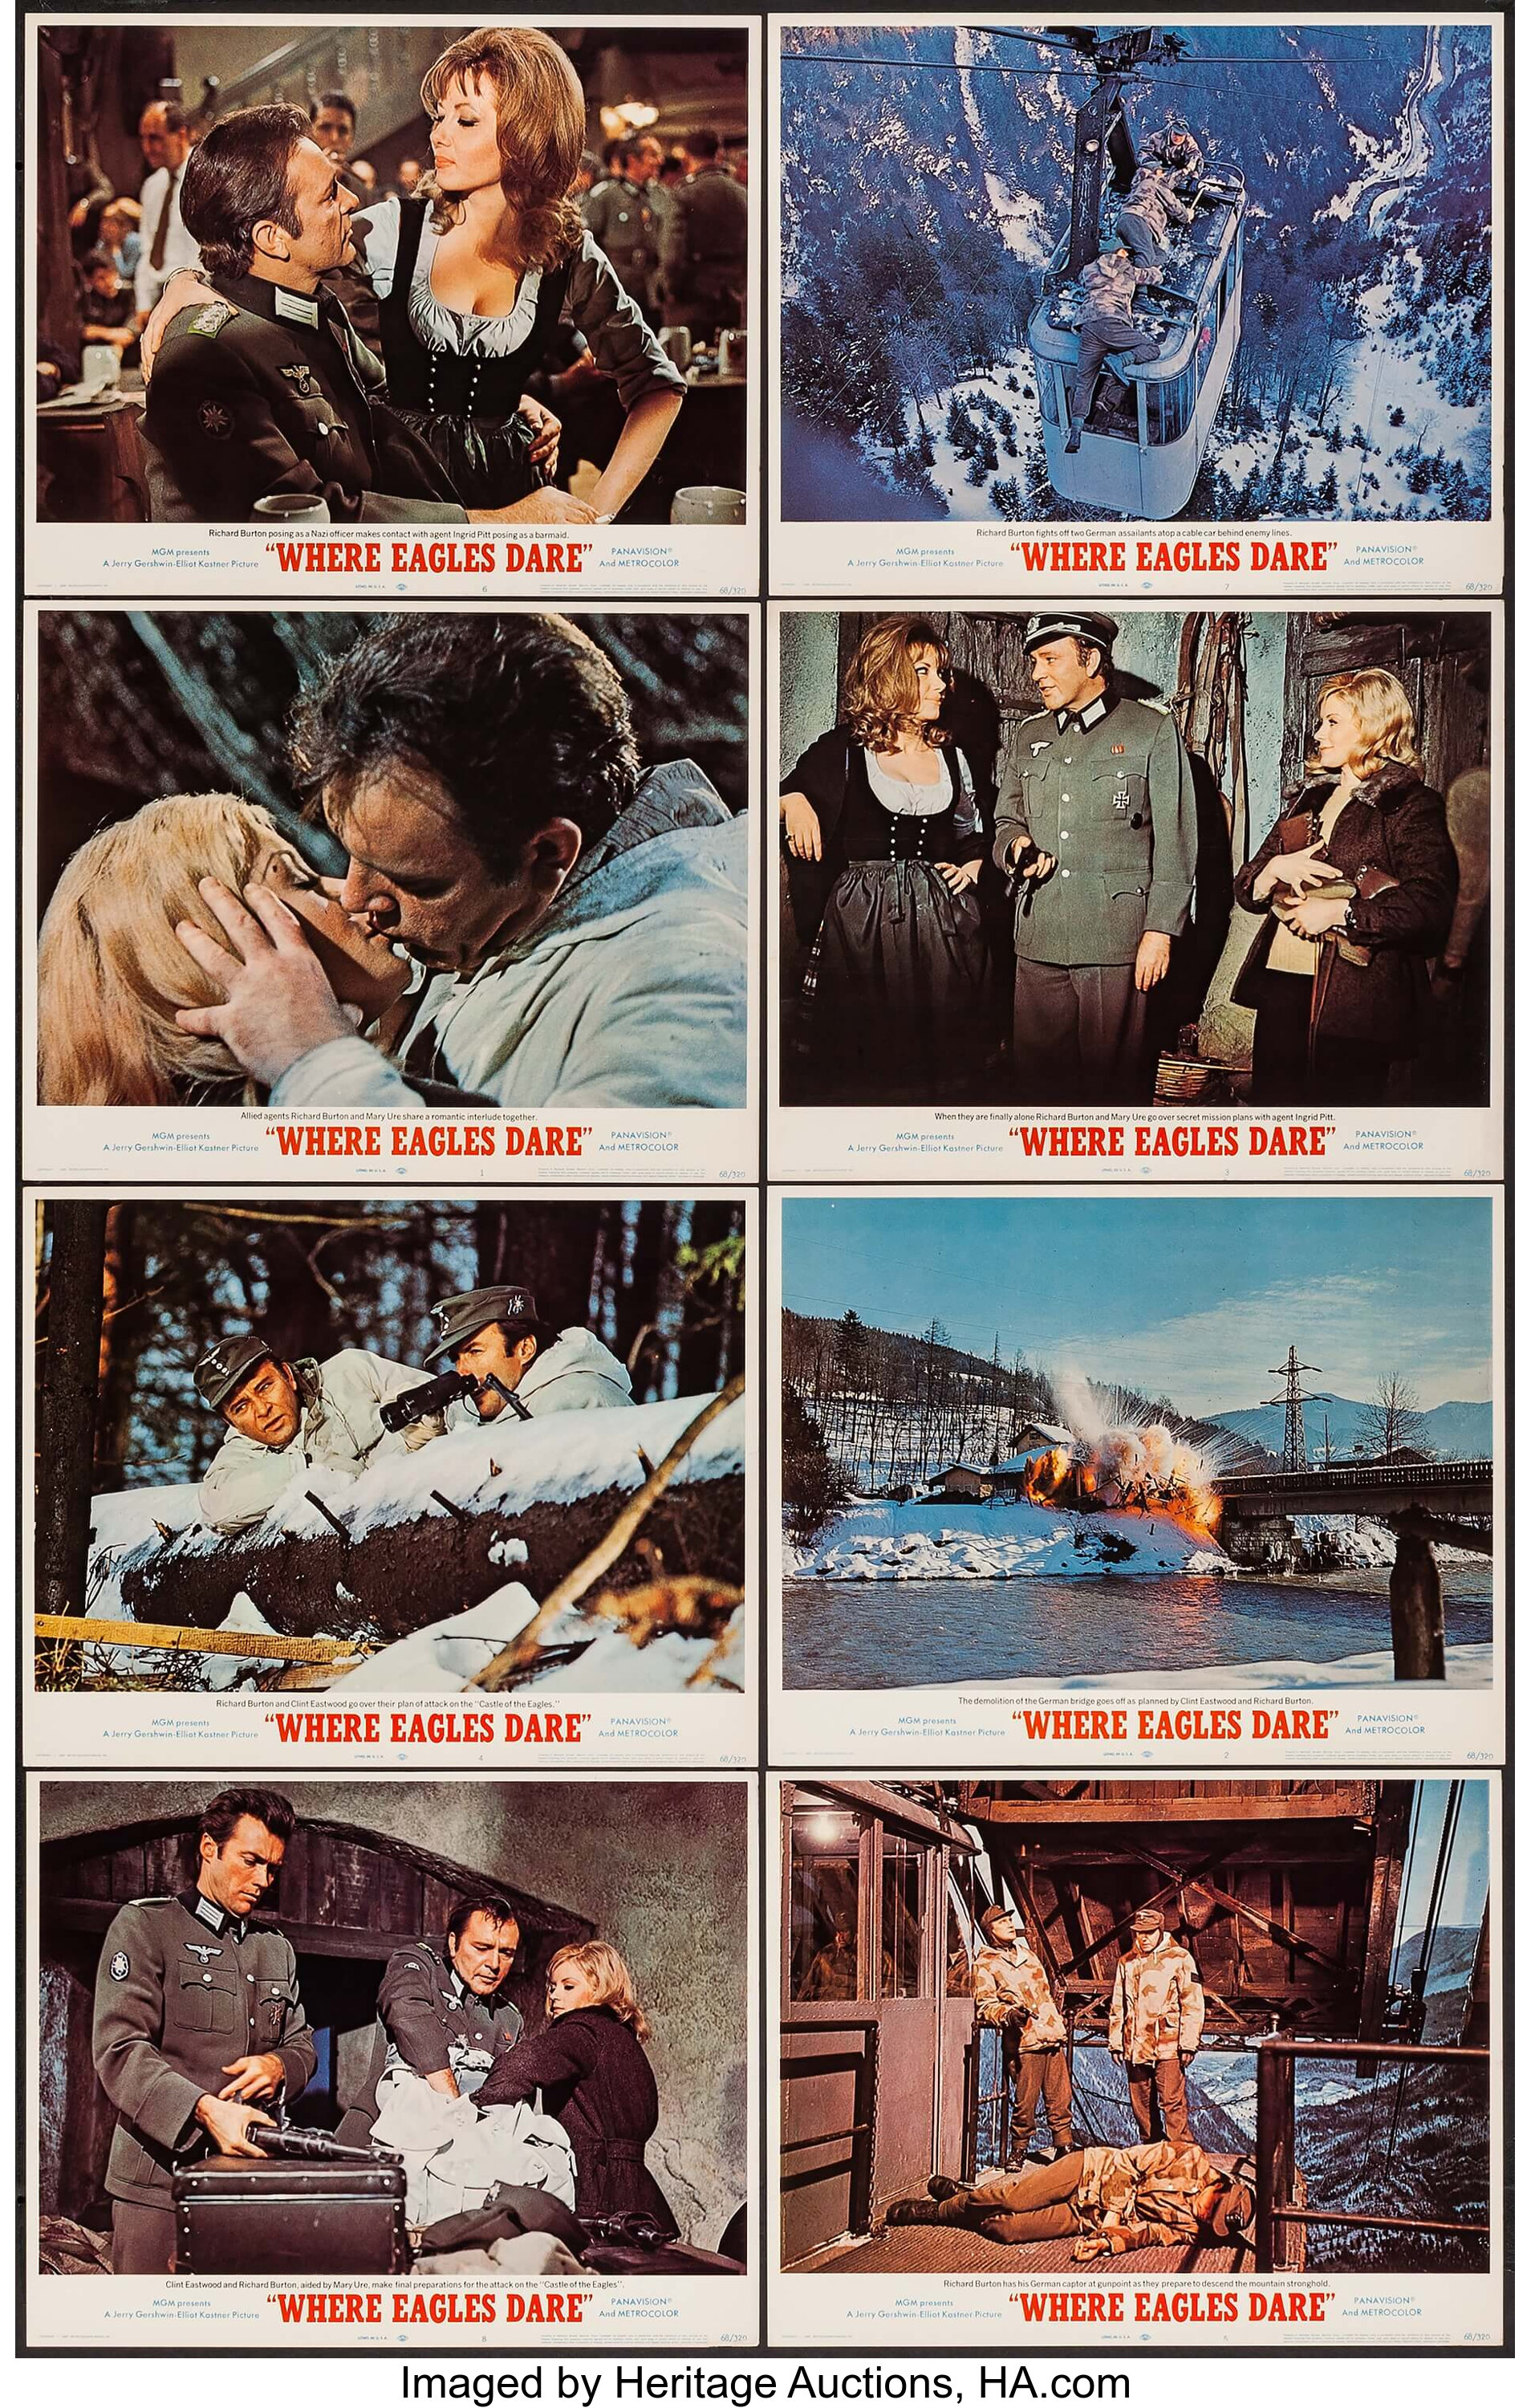 Where Eagles Dare Mgm 1968 Lobby Card Set Of 8 11 X 14 Lot 52479 Heritage Auctions 1216